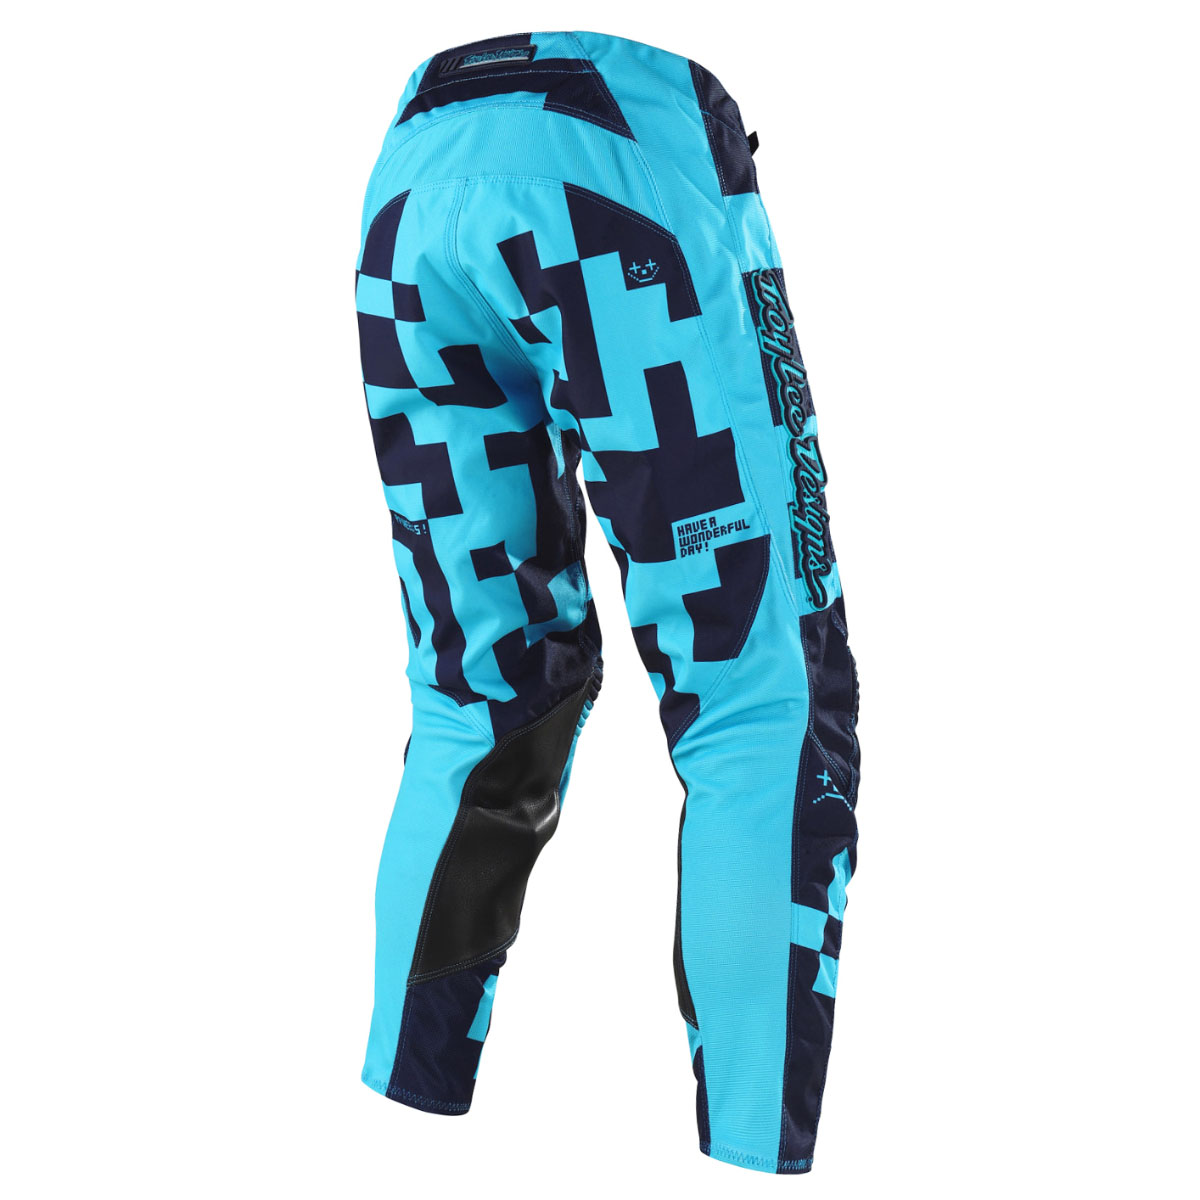 30, Turquoise/Navy Troy Lee Designs Mens Offroad Motocross GP Air Pant Maze 